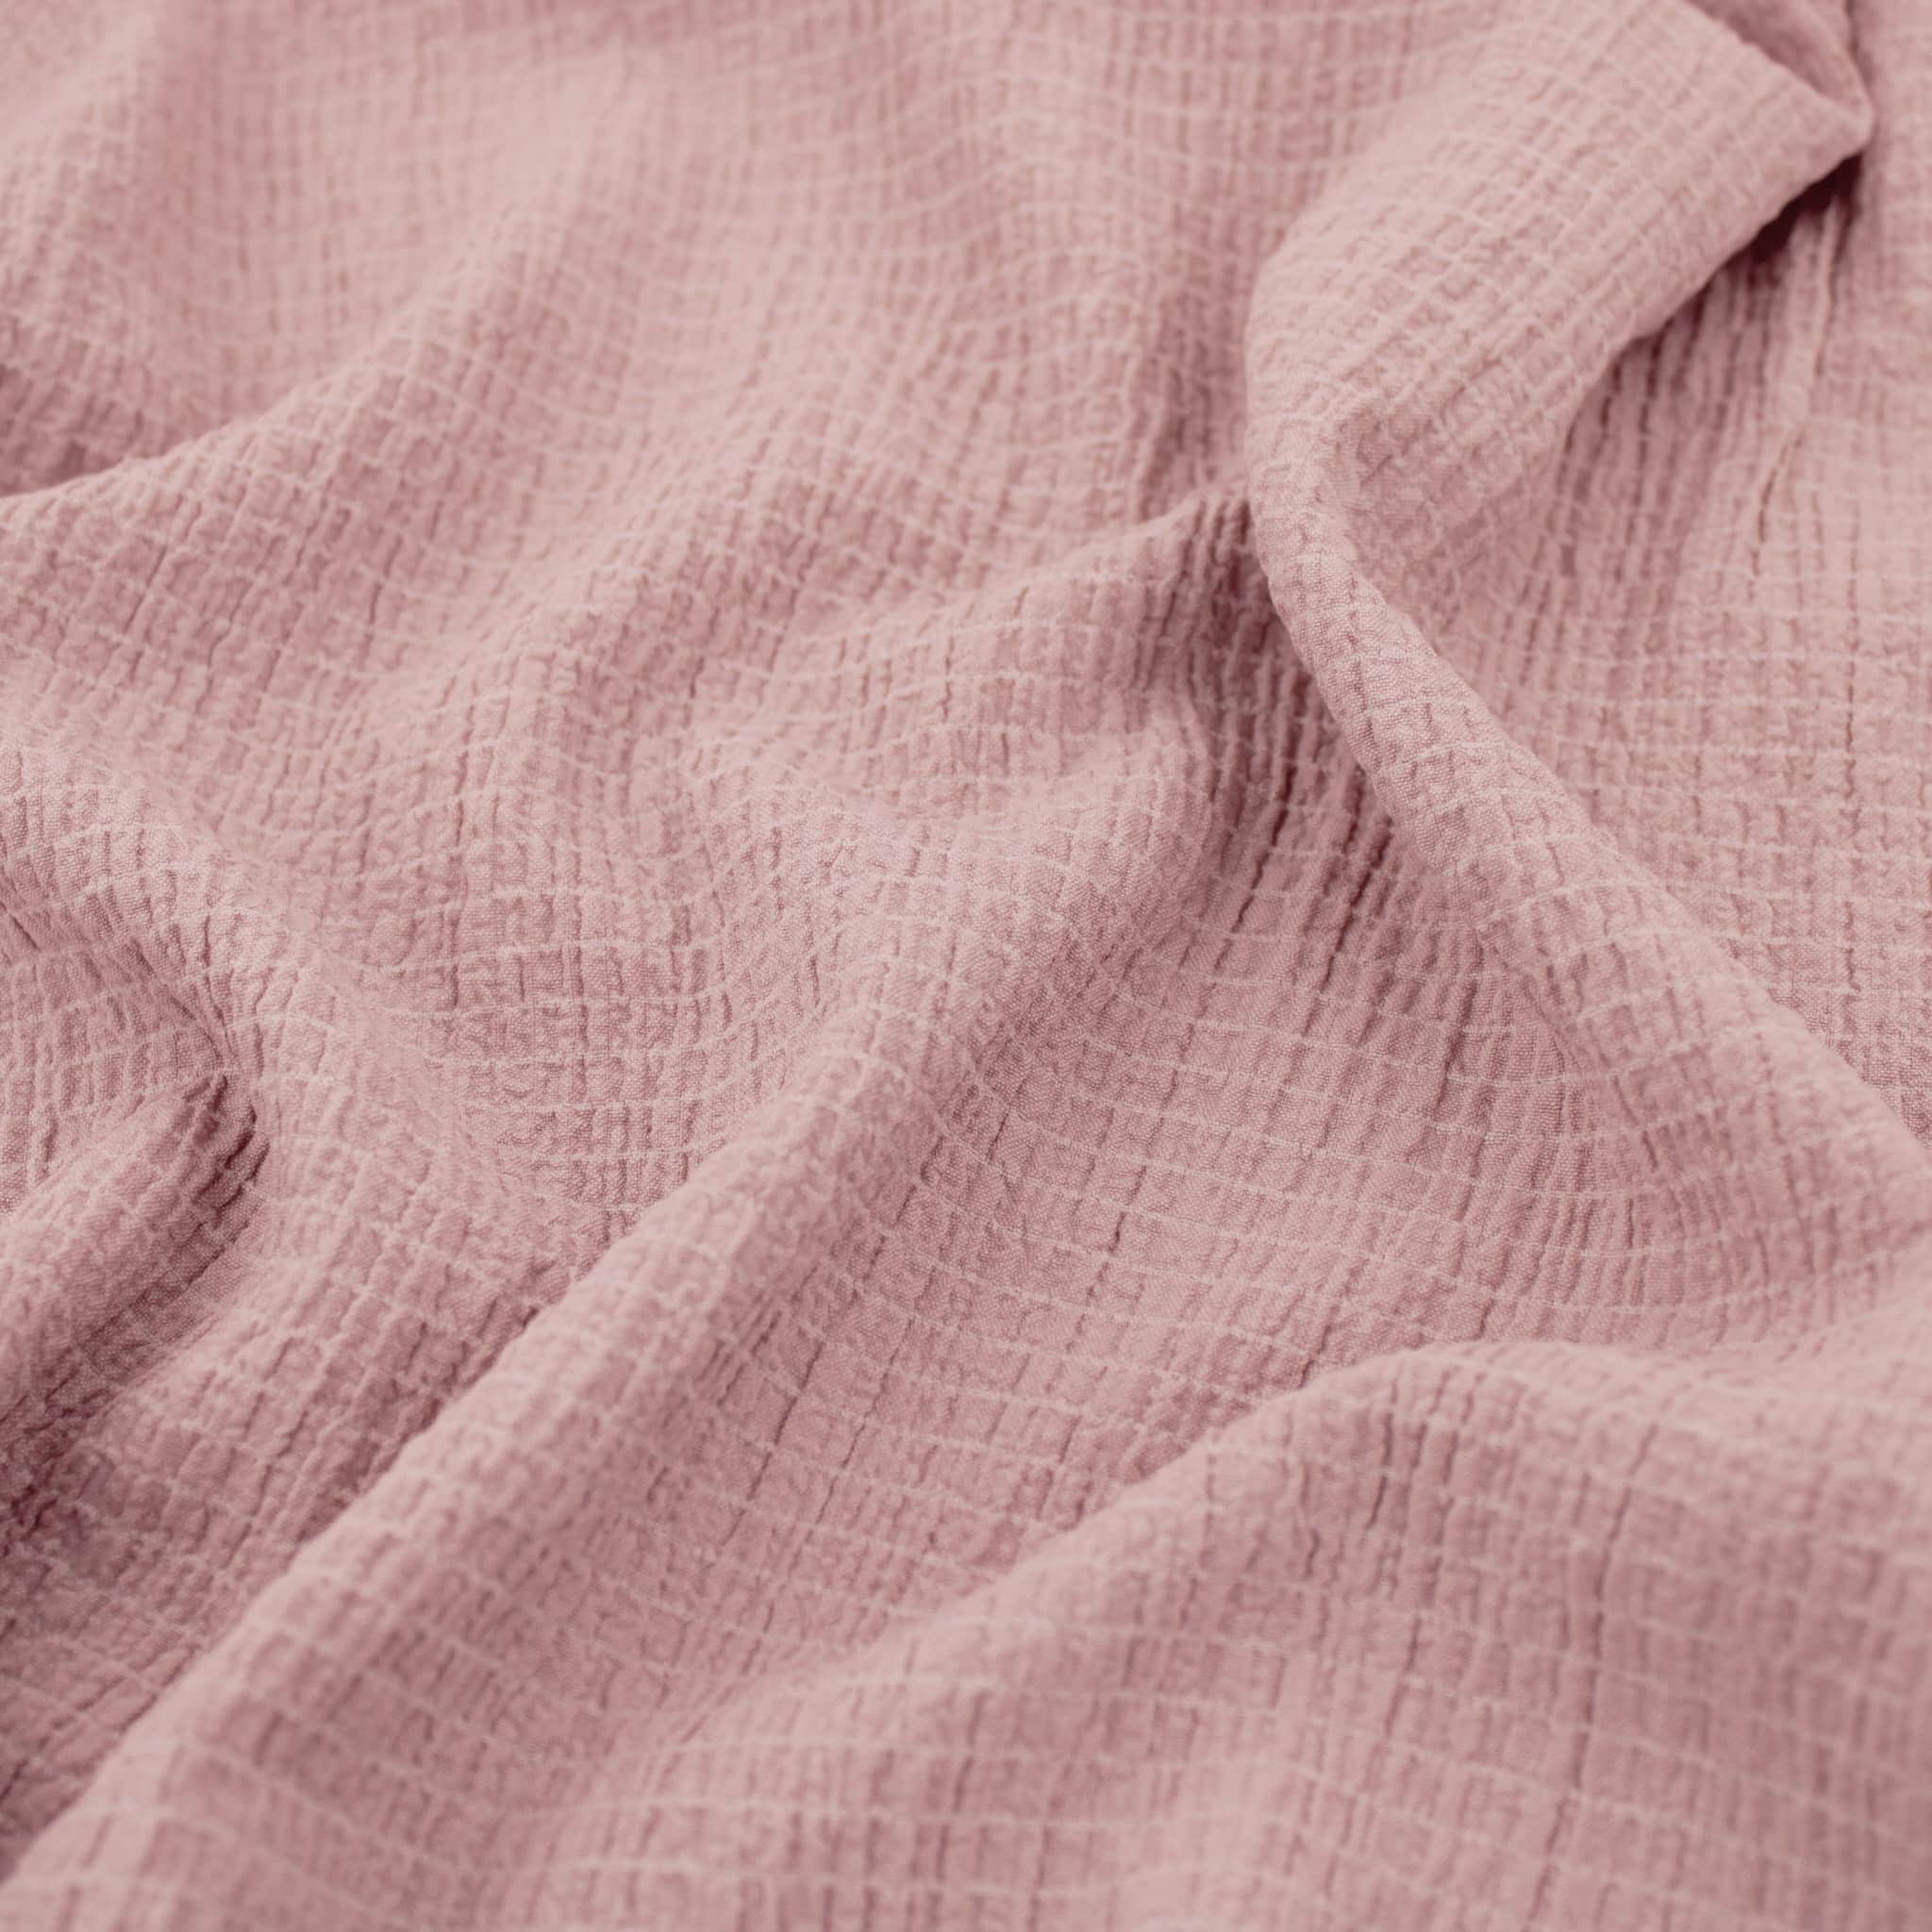 Rayon Blend Elastane Fabric Multiple Remnants Pink Fabric Smooth Fabric  Soft Fabric Fashion Fabric Vintage Clothing